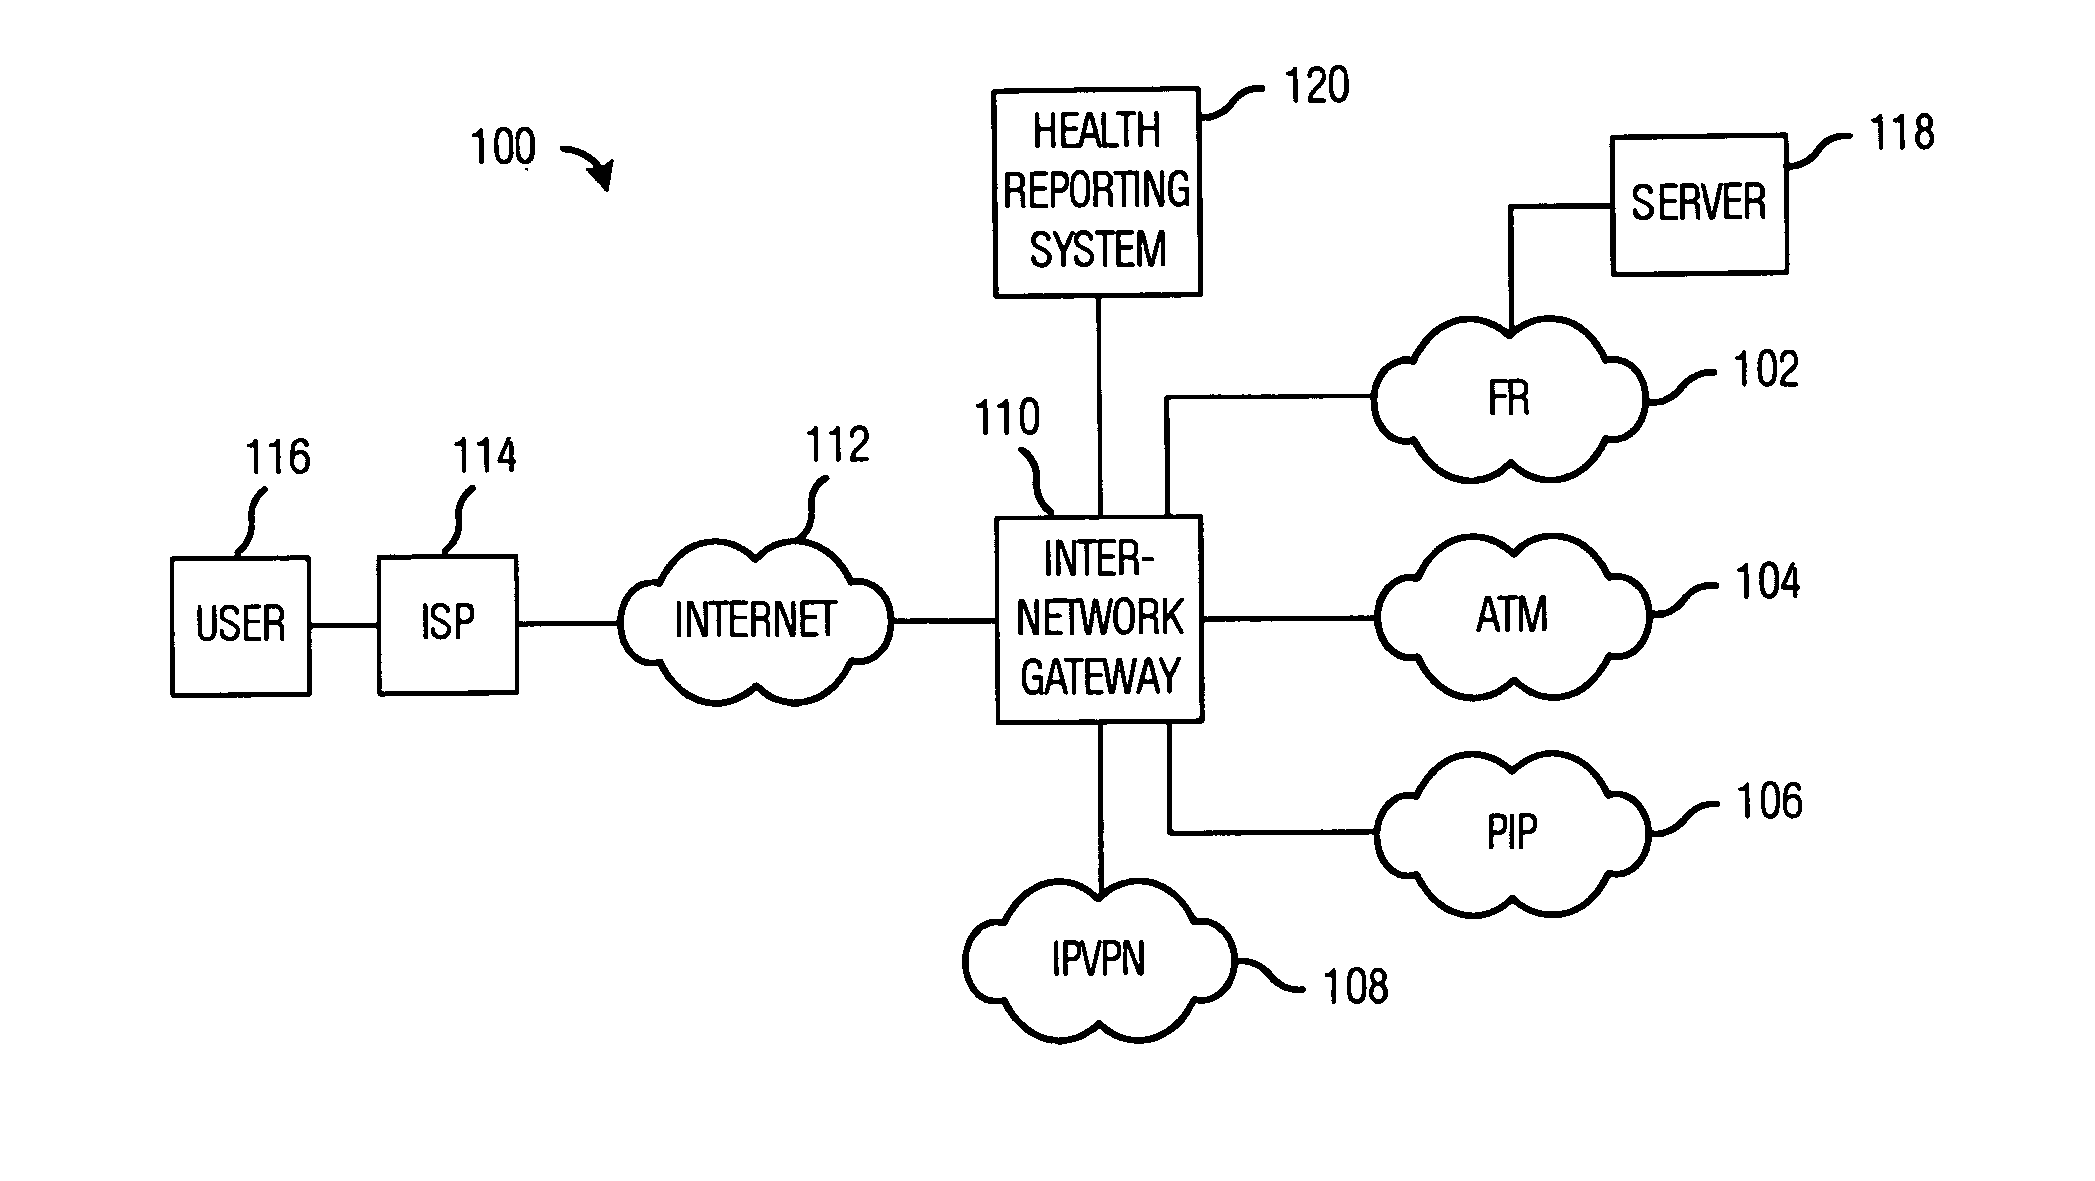 Health reporting mechanism for inter-network gateway